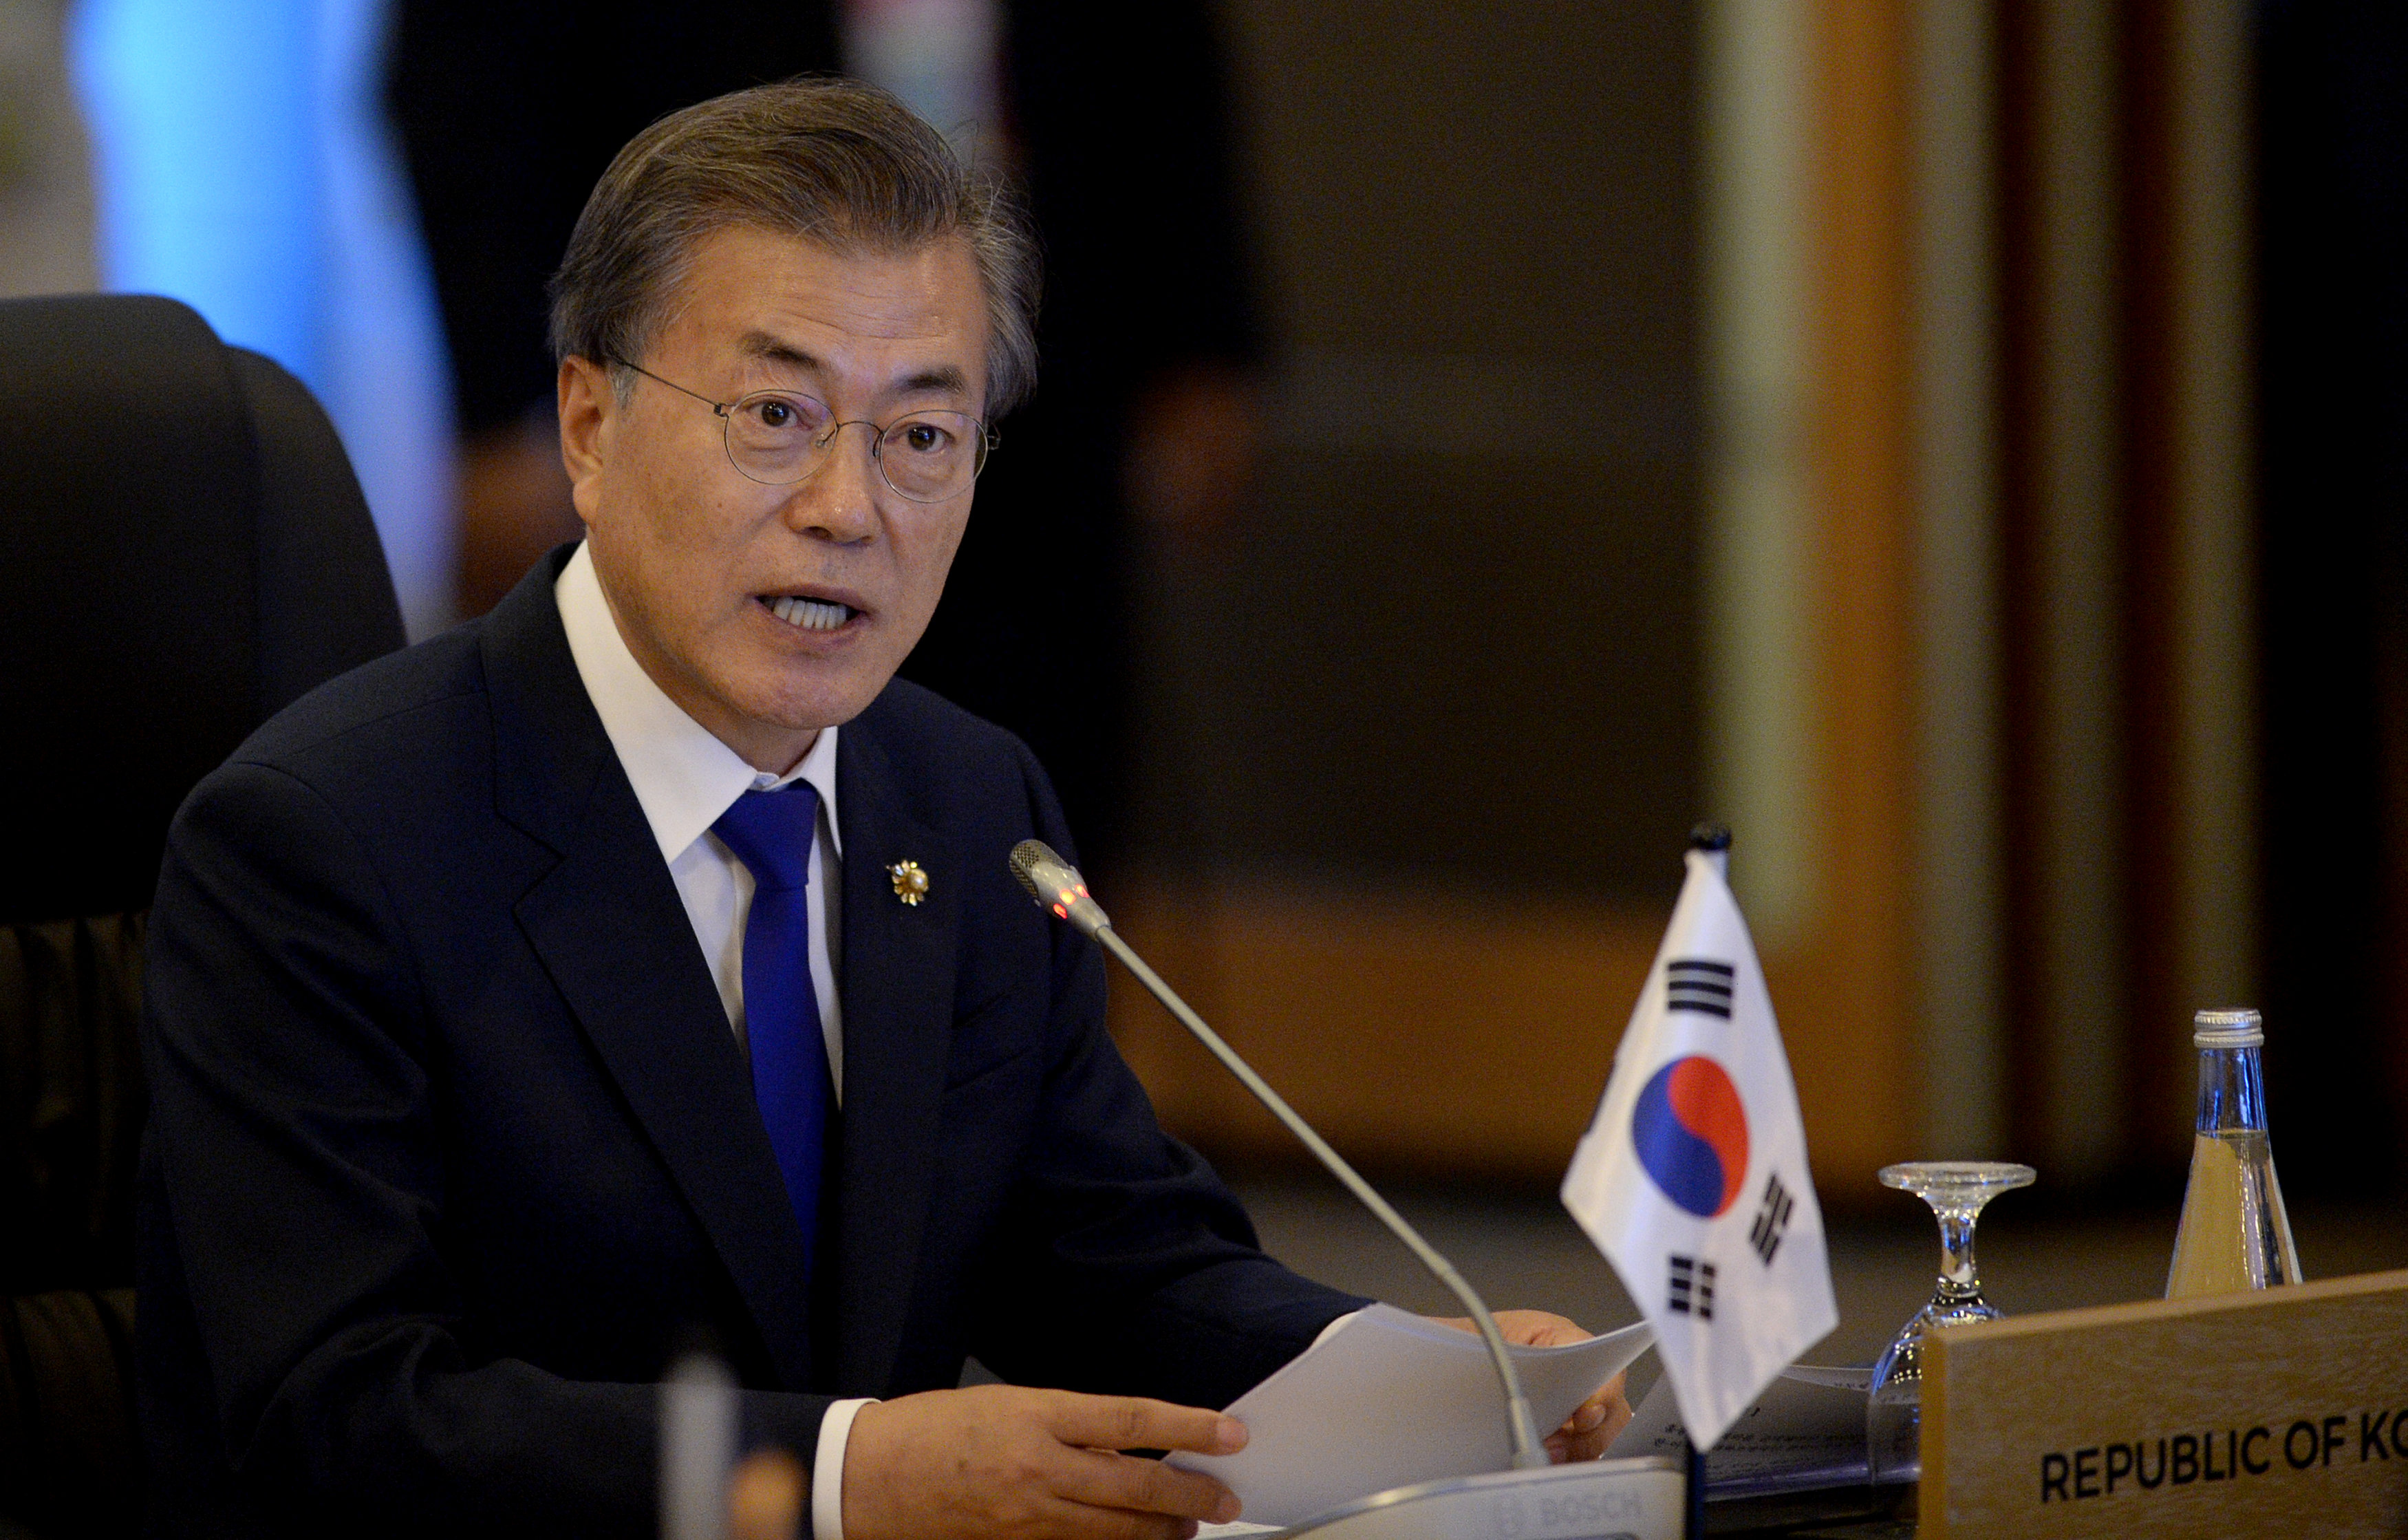 North Korea nuclear arsenal too developed to destroy quickly, says South Korean president